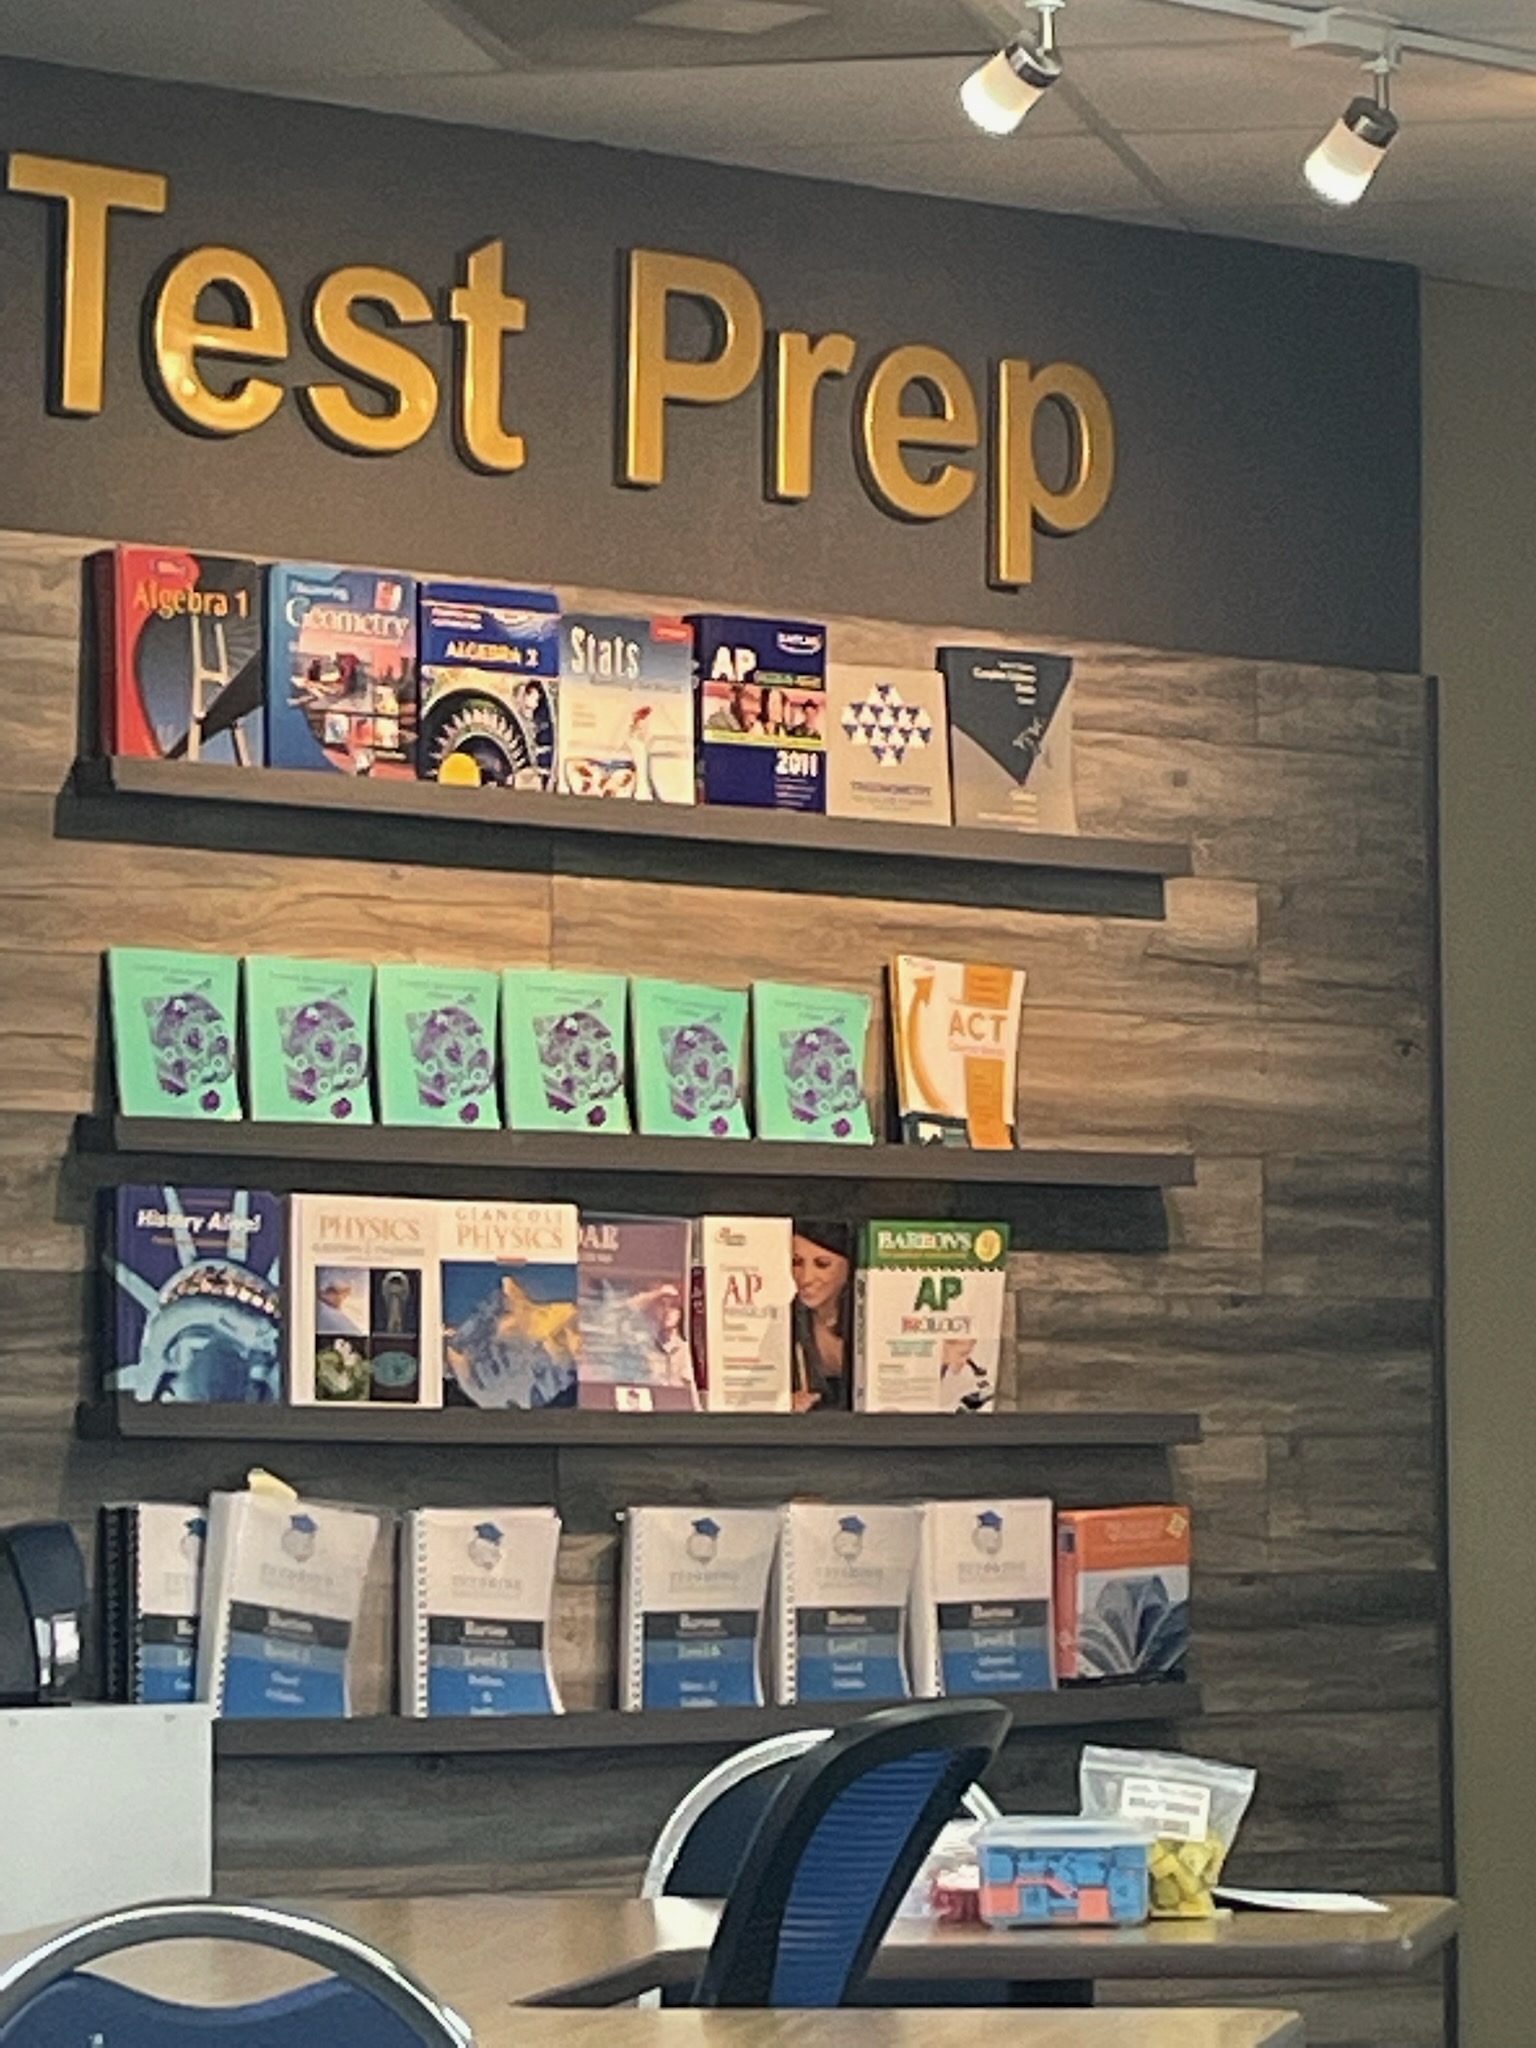 SAT prep books on display at Tutoring Excellence on the 14th of March. As the SATs approach many look to test prep books to solidify their success.